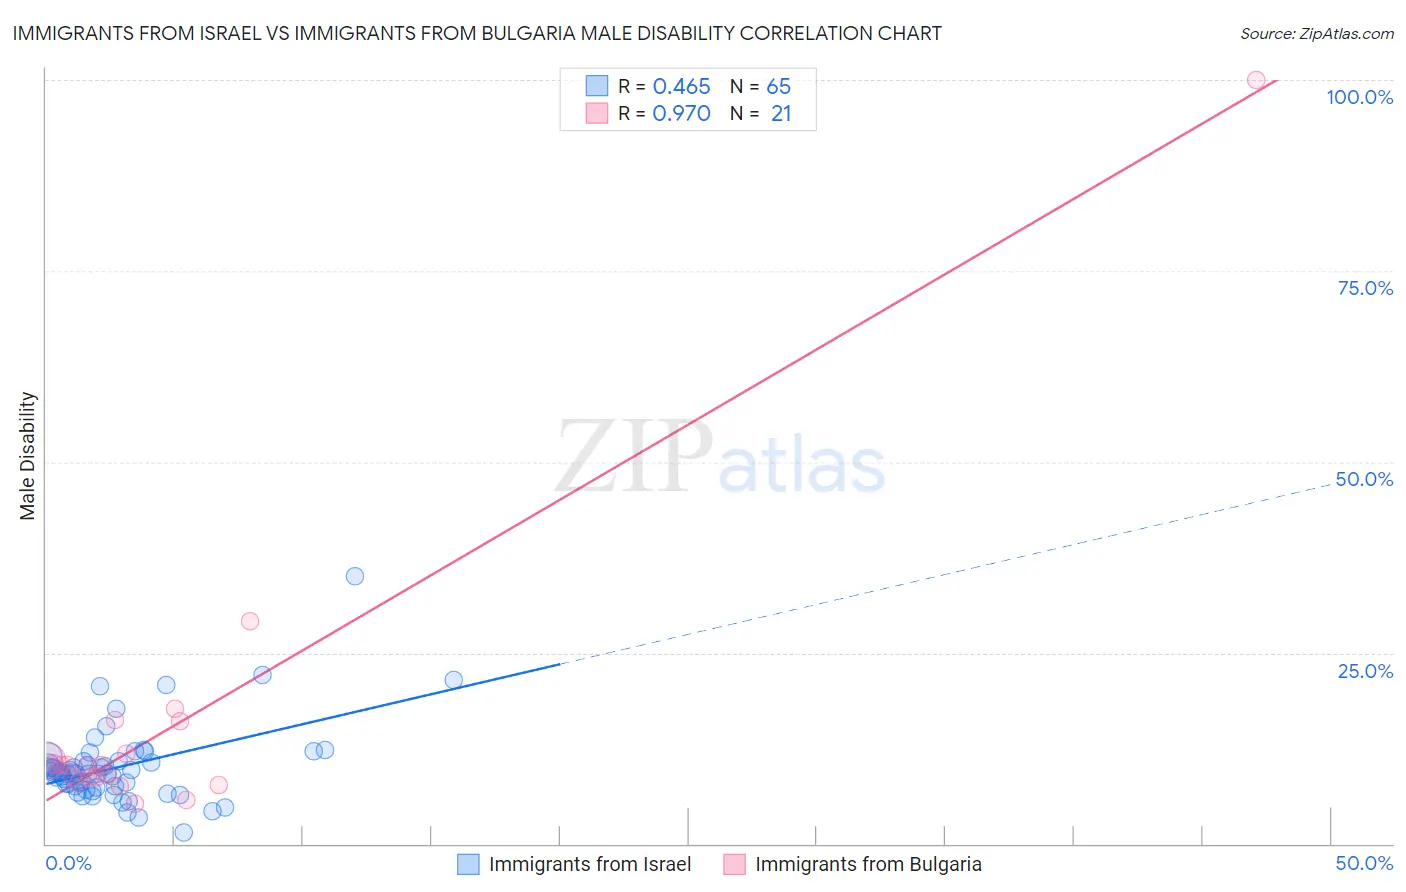 Immigrants from Israel vs Immigrants from Bulgaria Male Disability